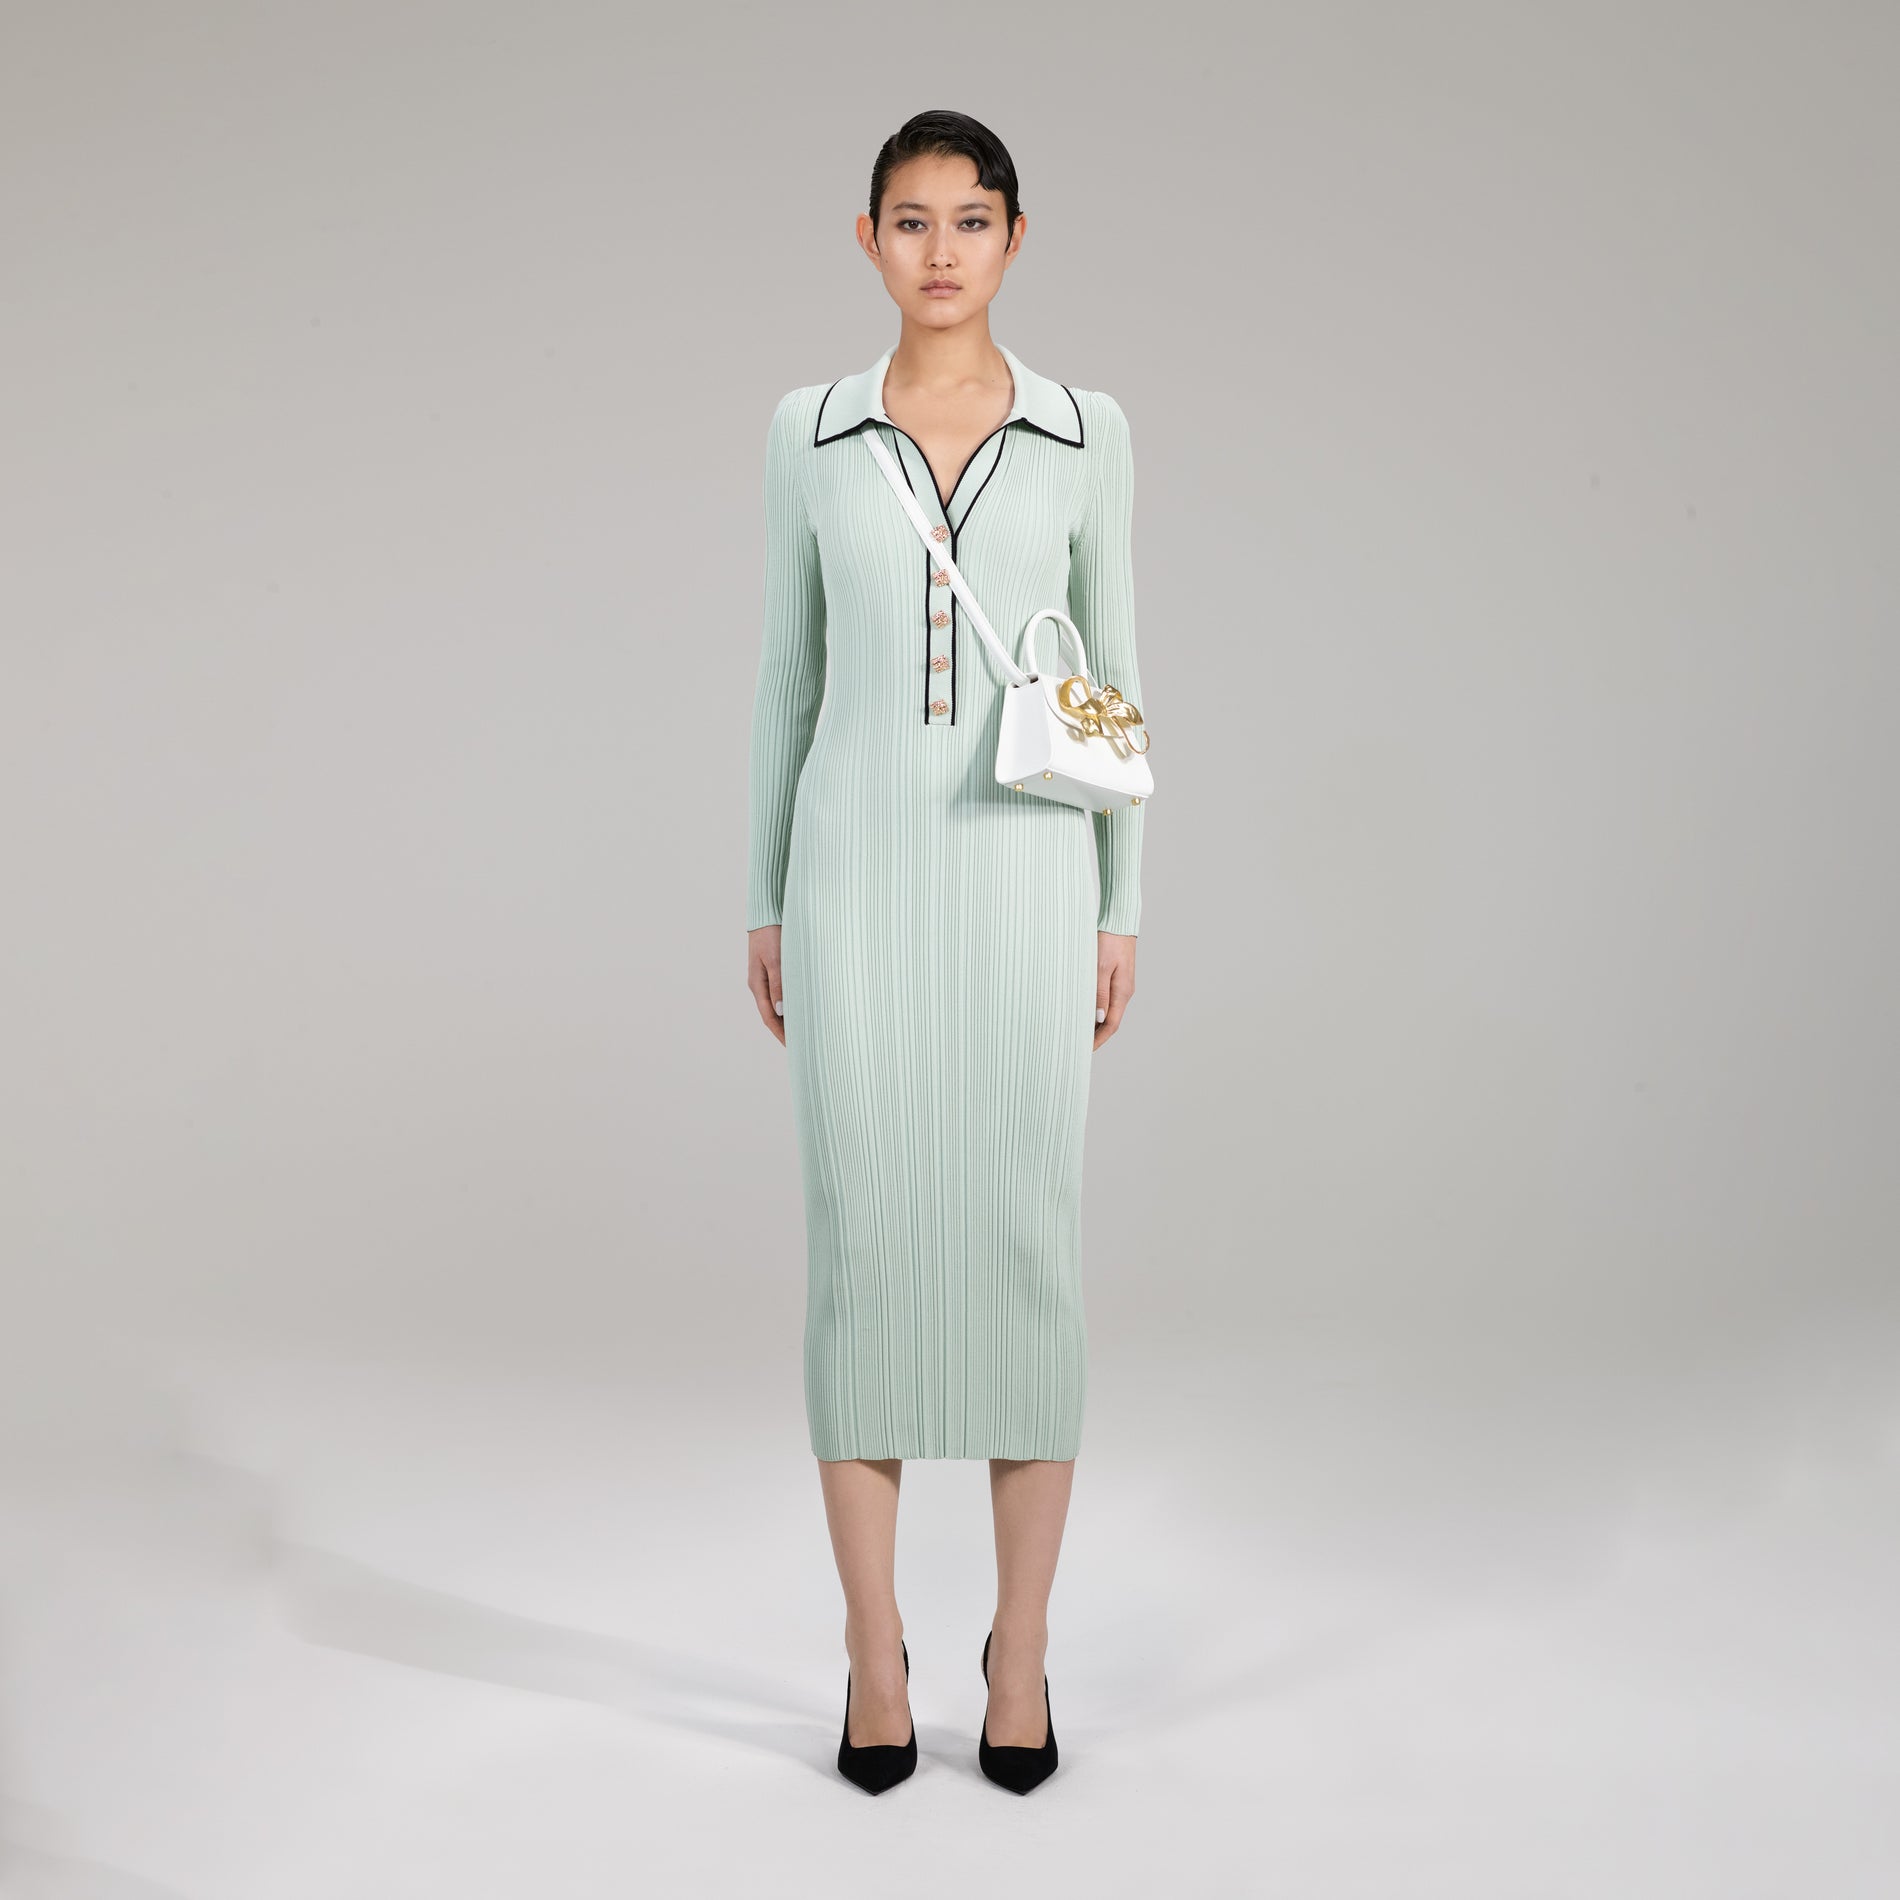 A woman wearing the Pale Green Contrast Stitch Knit Dress